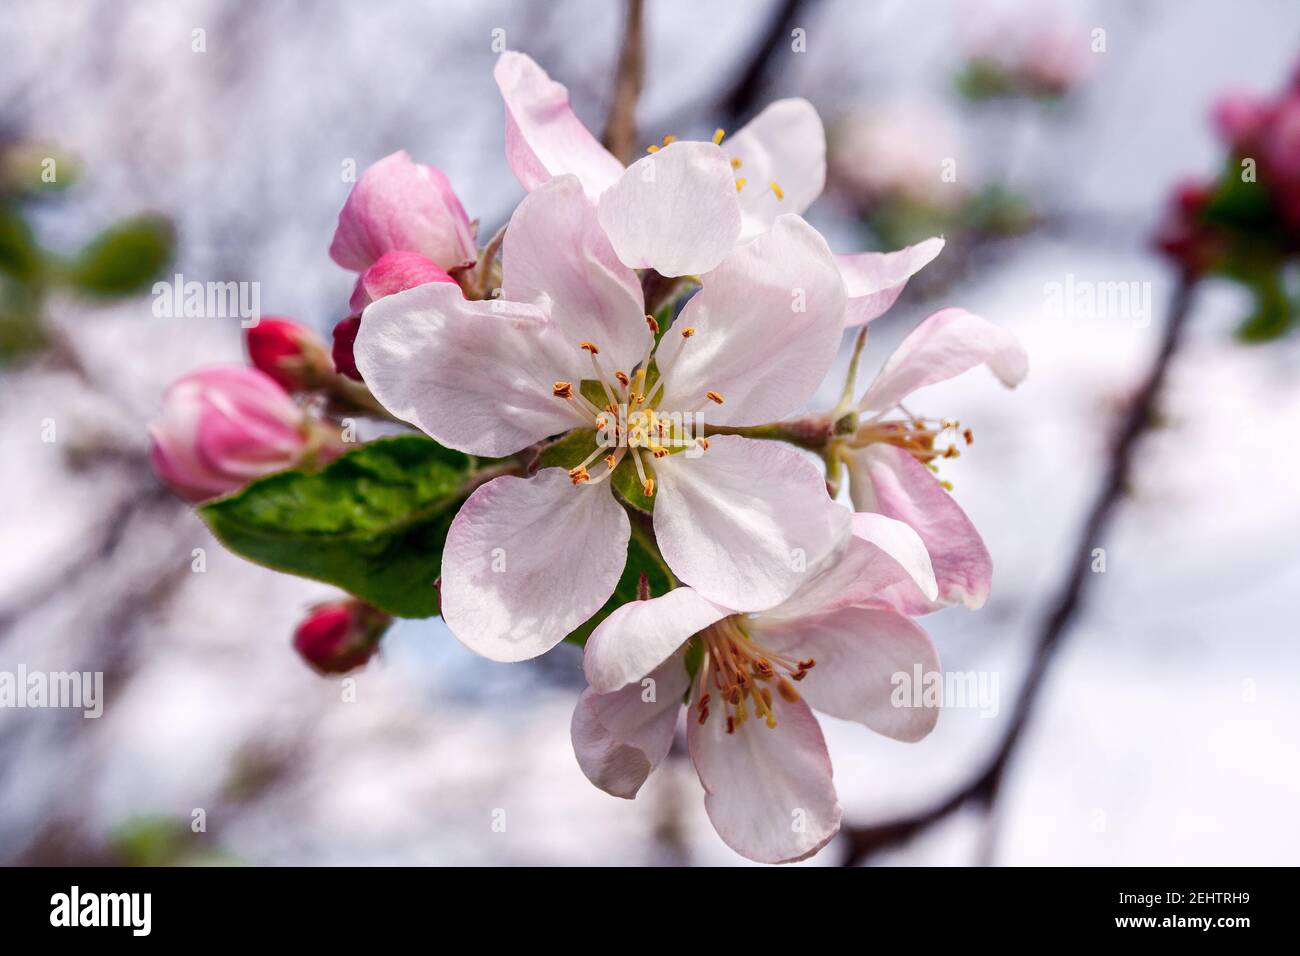 open flower and buds of Apple tree flowers Stock Photo